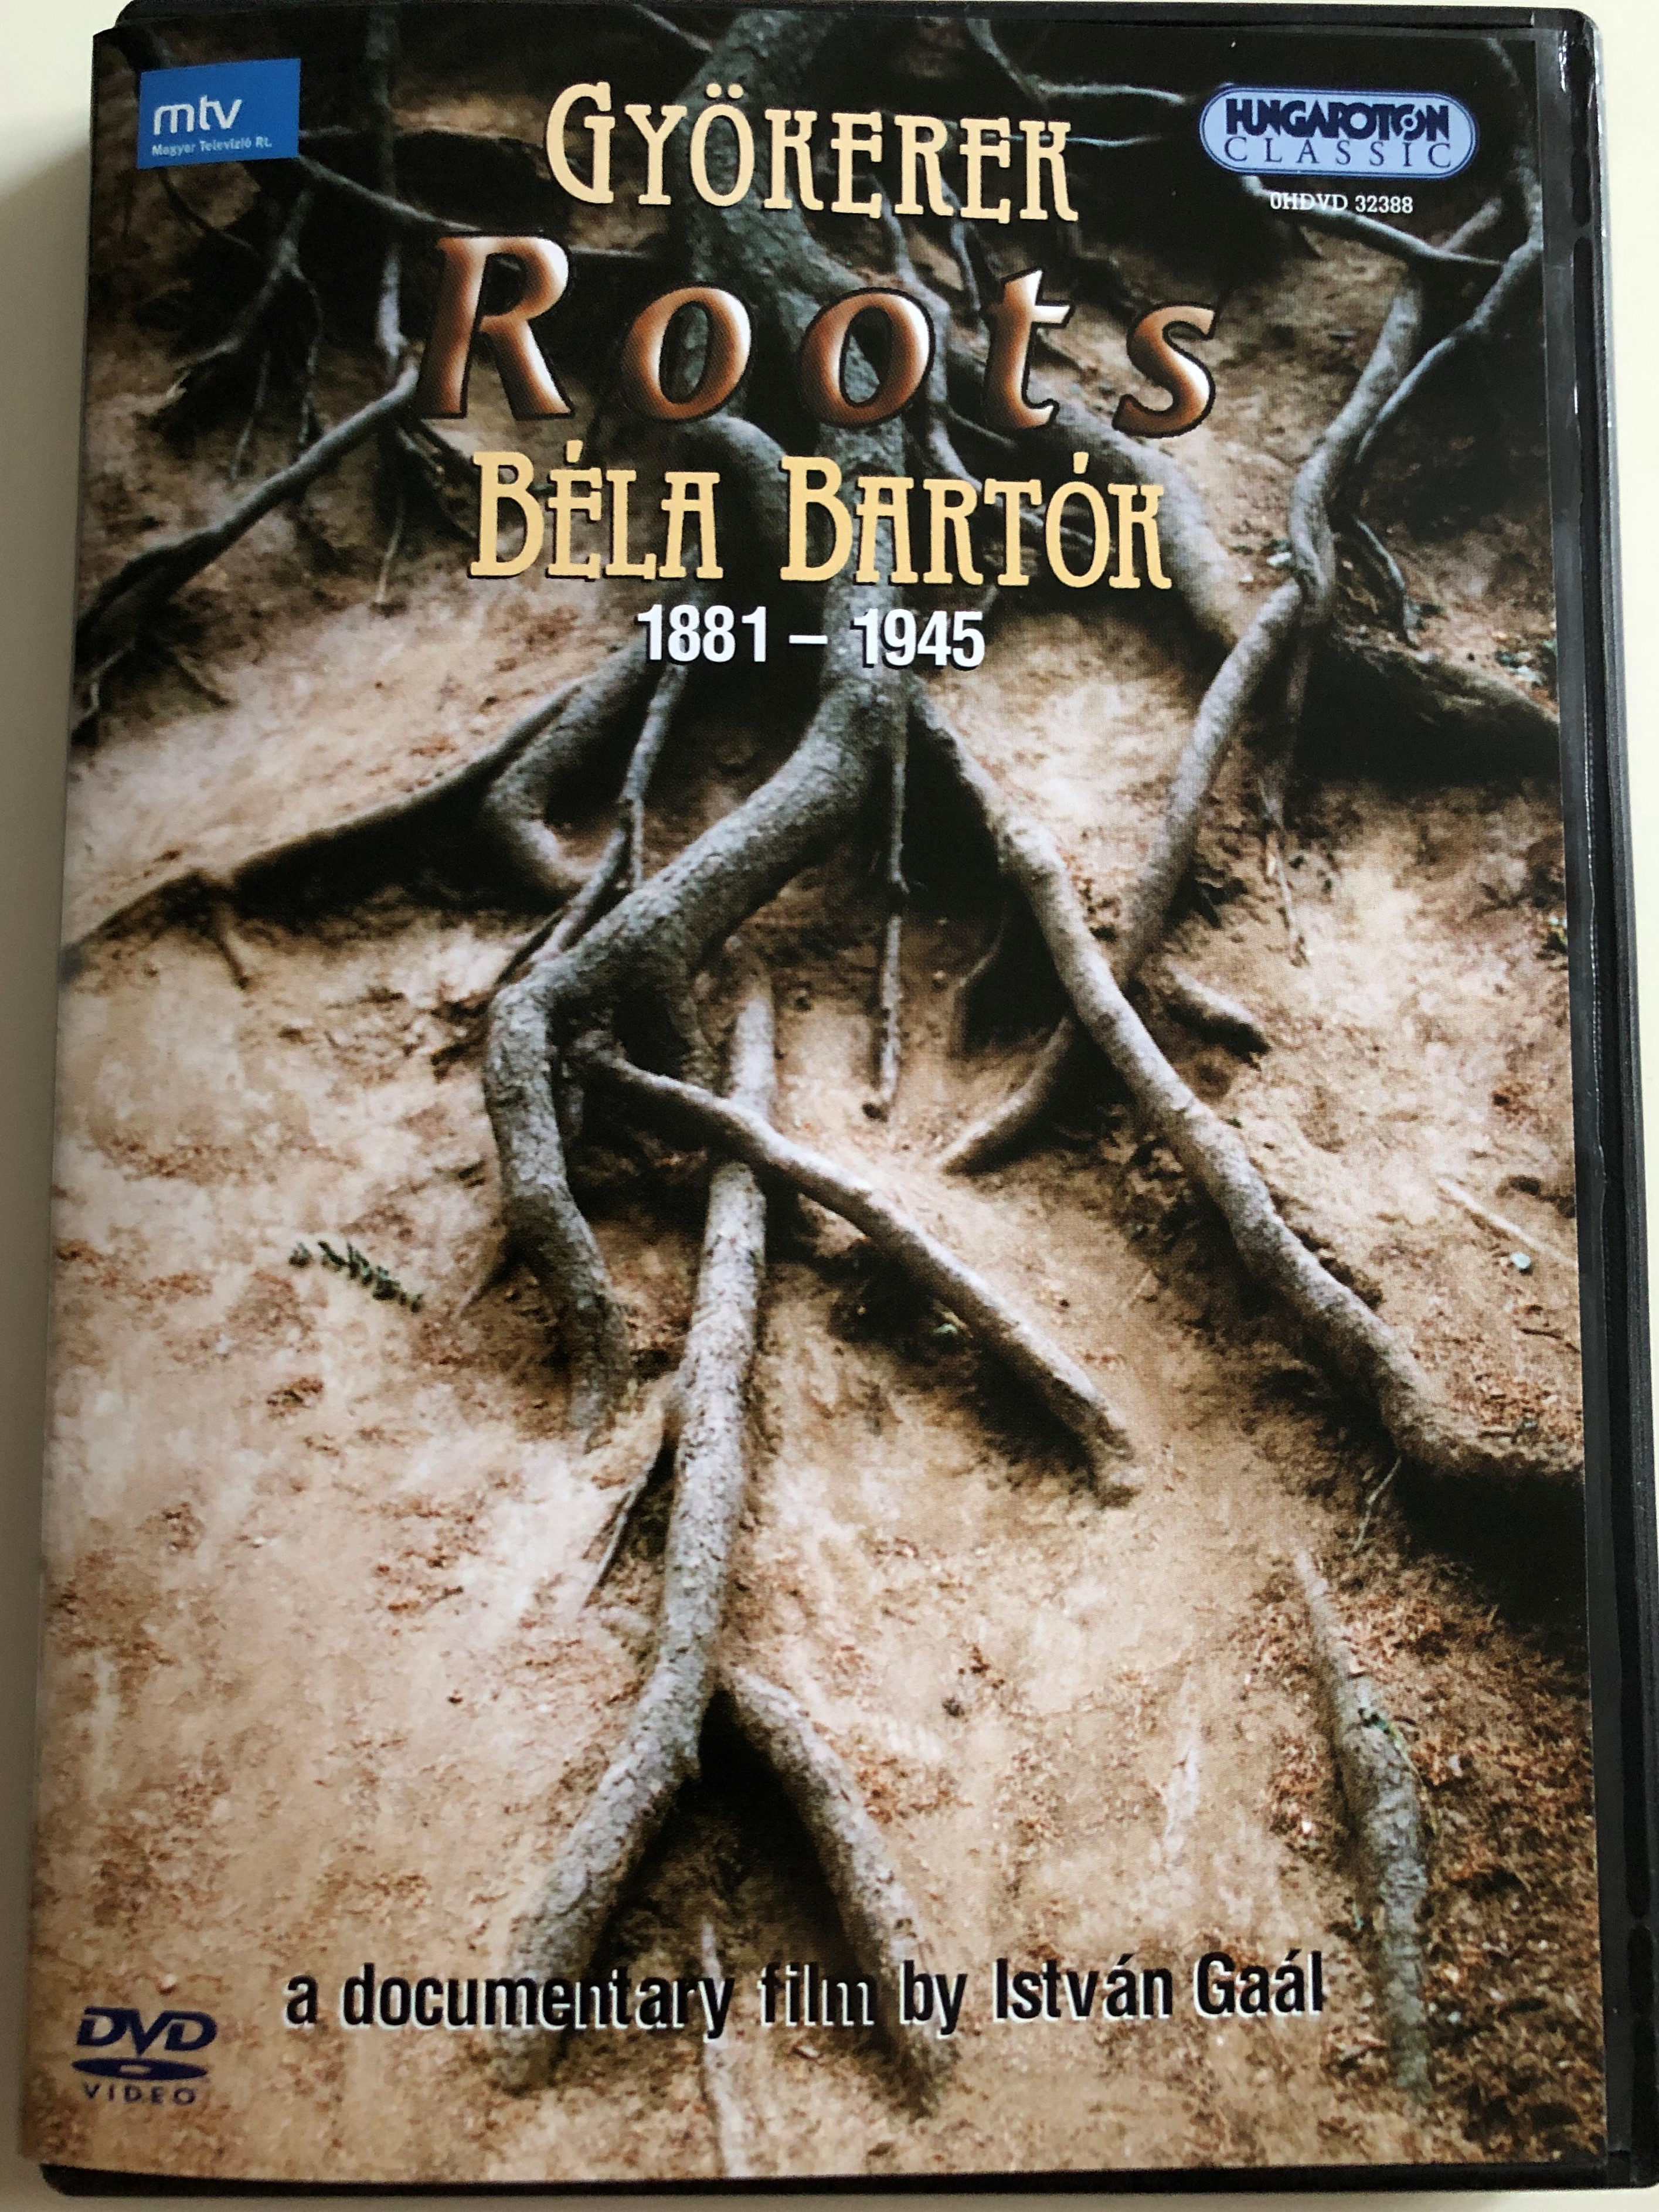 gy-kerek-roots-dvd-2005-b-la-bart-k-a-documentary-film-by-istv-n-ga-l-producer-judit-v-rb-r-a-complete-review-of-bart-k-s-personal-and-artistic-development-hungaroton-classic-hdvd-32388-1-.jpg